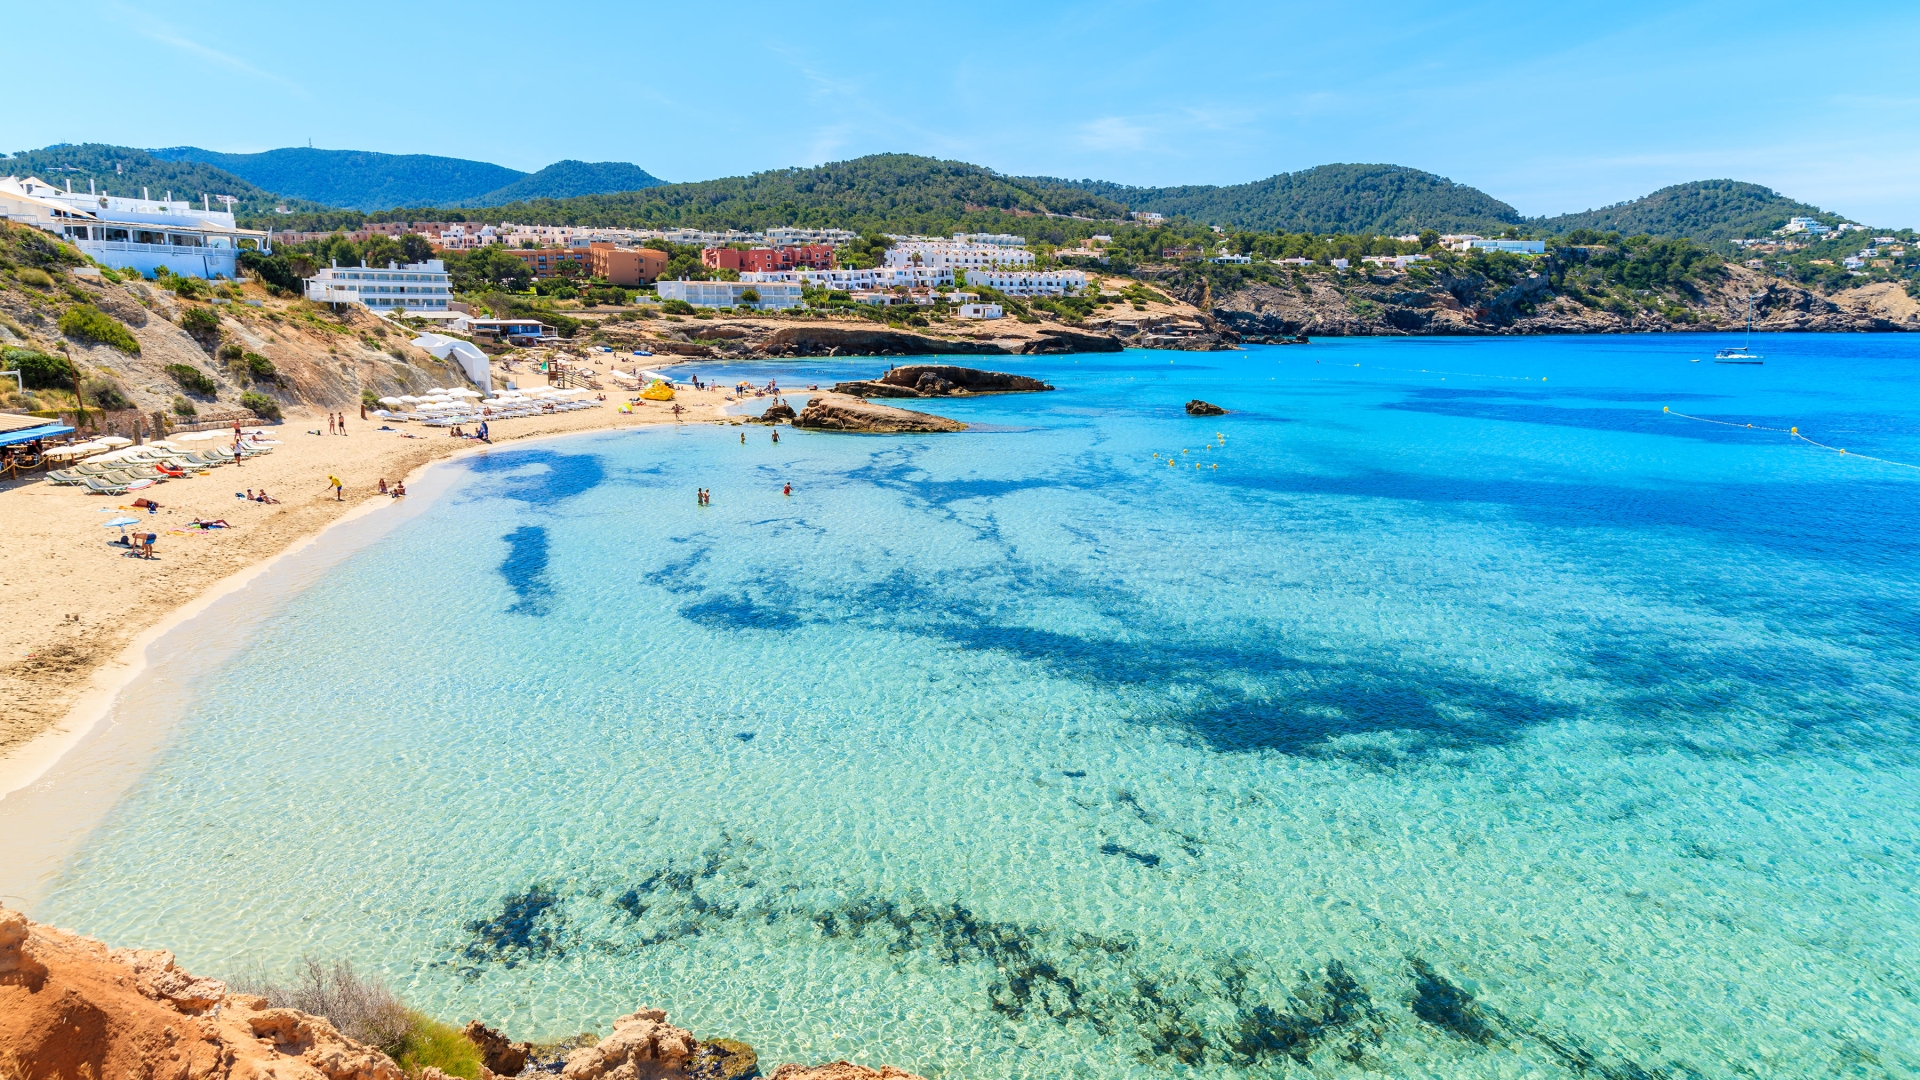 Under two hours away from the UK is the country that has the best beaches in Europe.